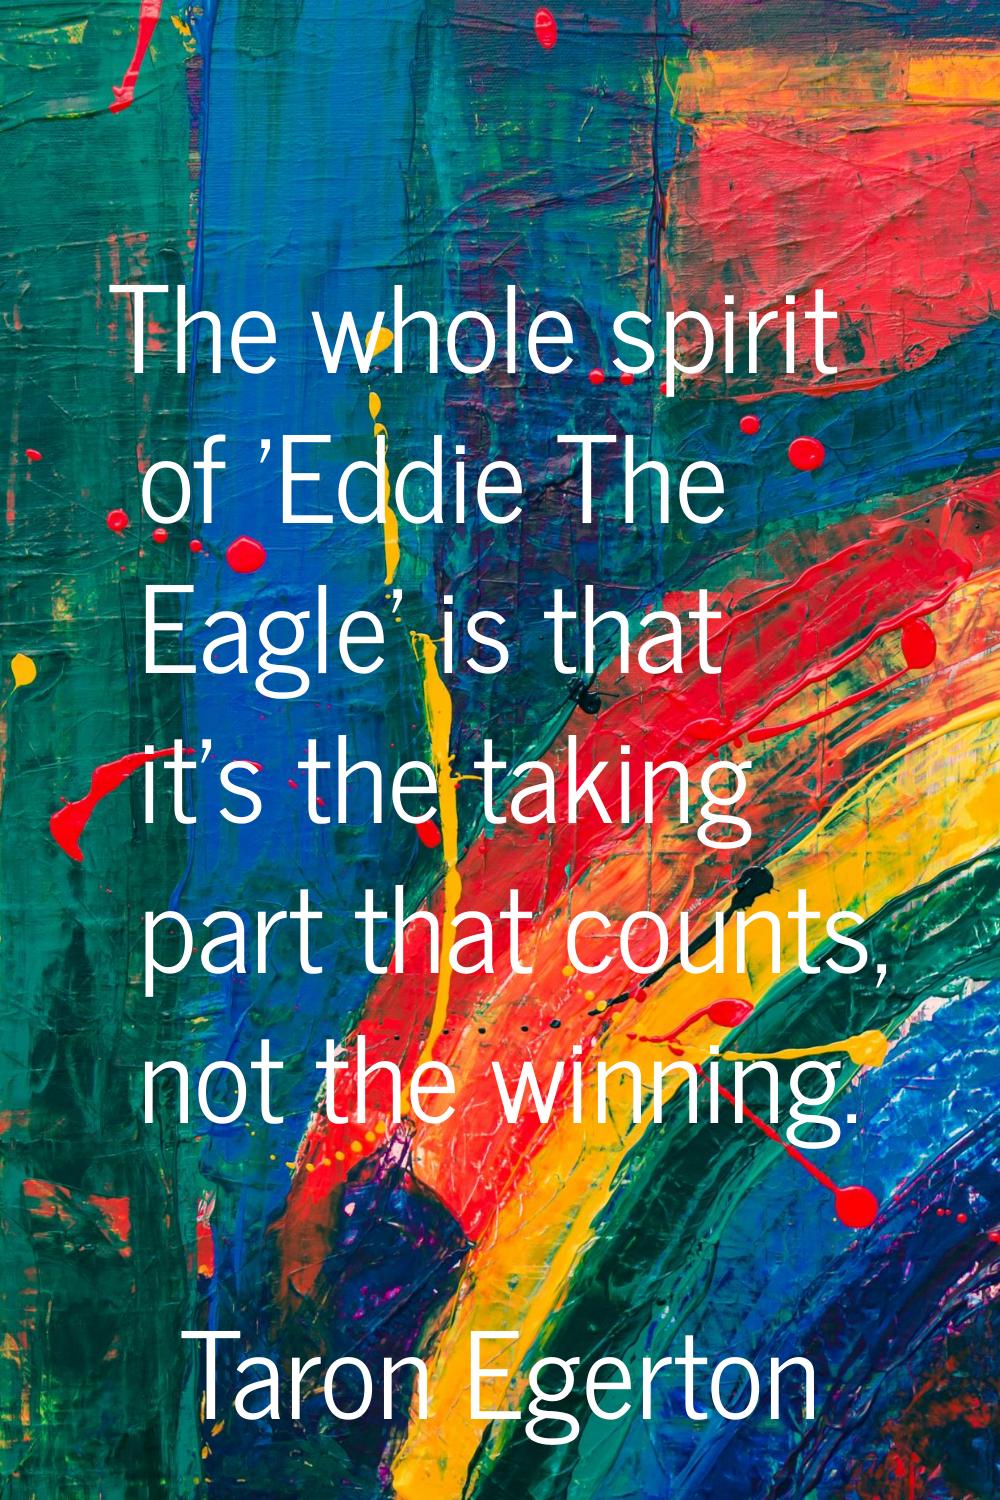 The whole spirit of 'Eddie The Eagle' is that it's the taking part that counts, not the winning.